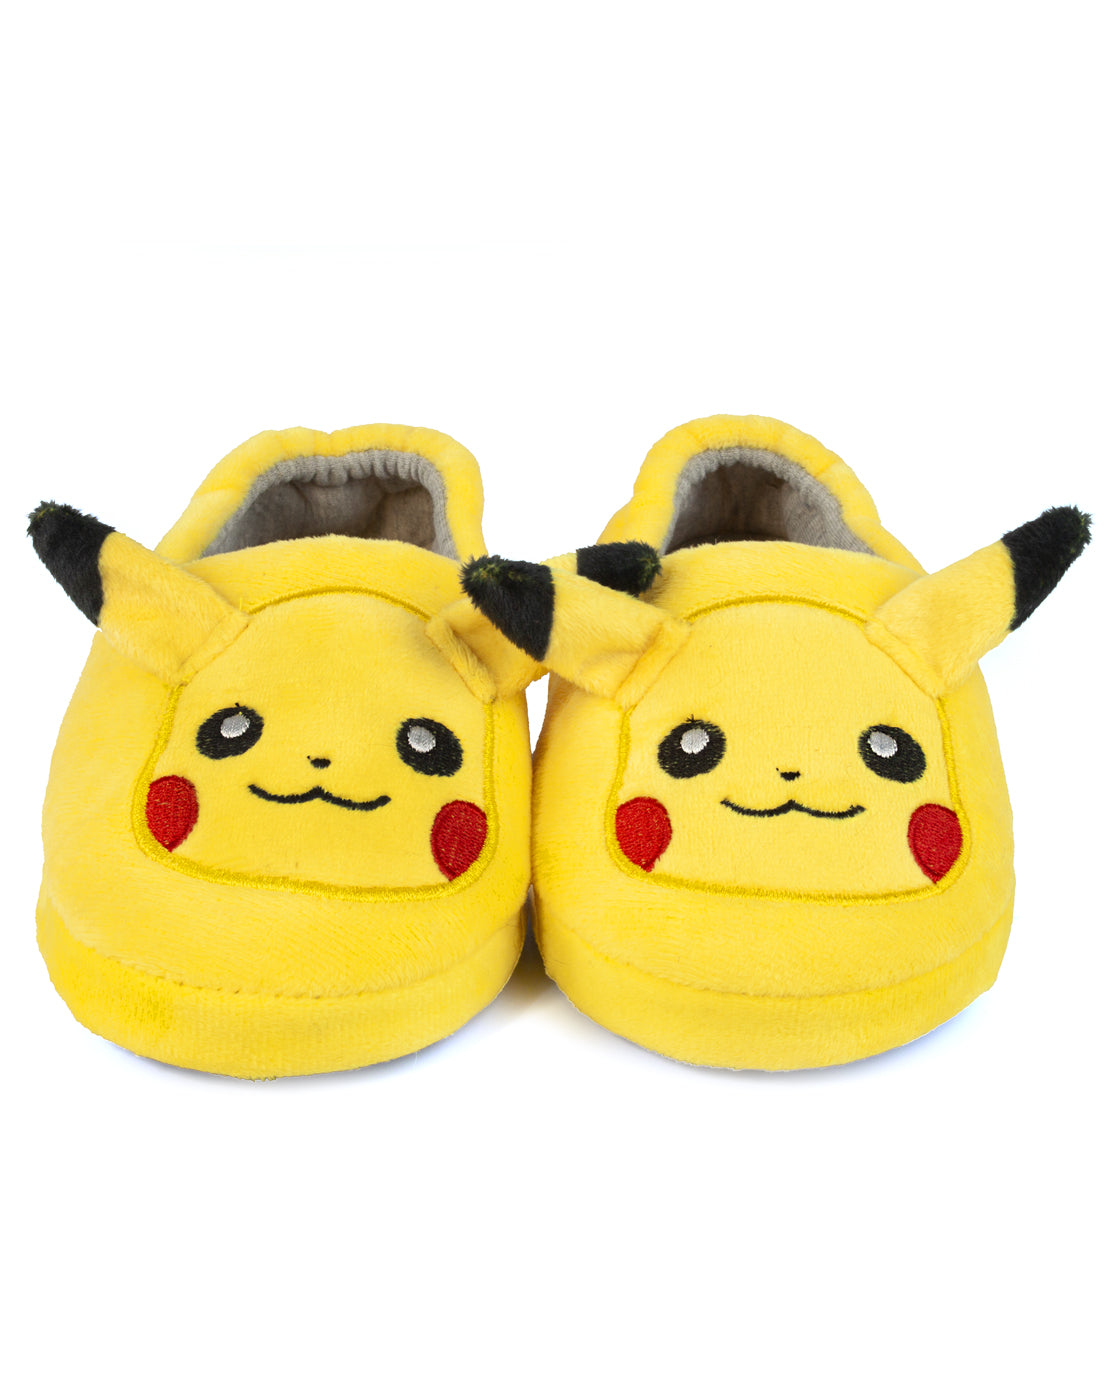 Pokemon Pikachu Slippers for Boys and 